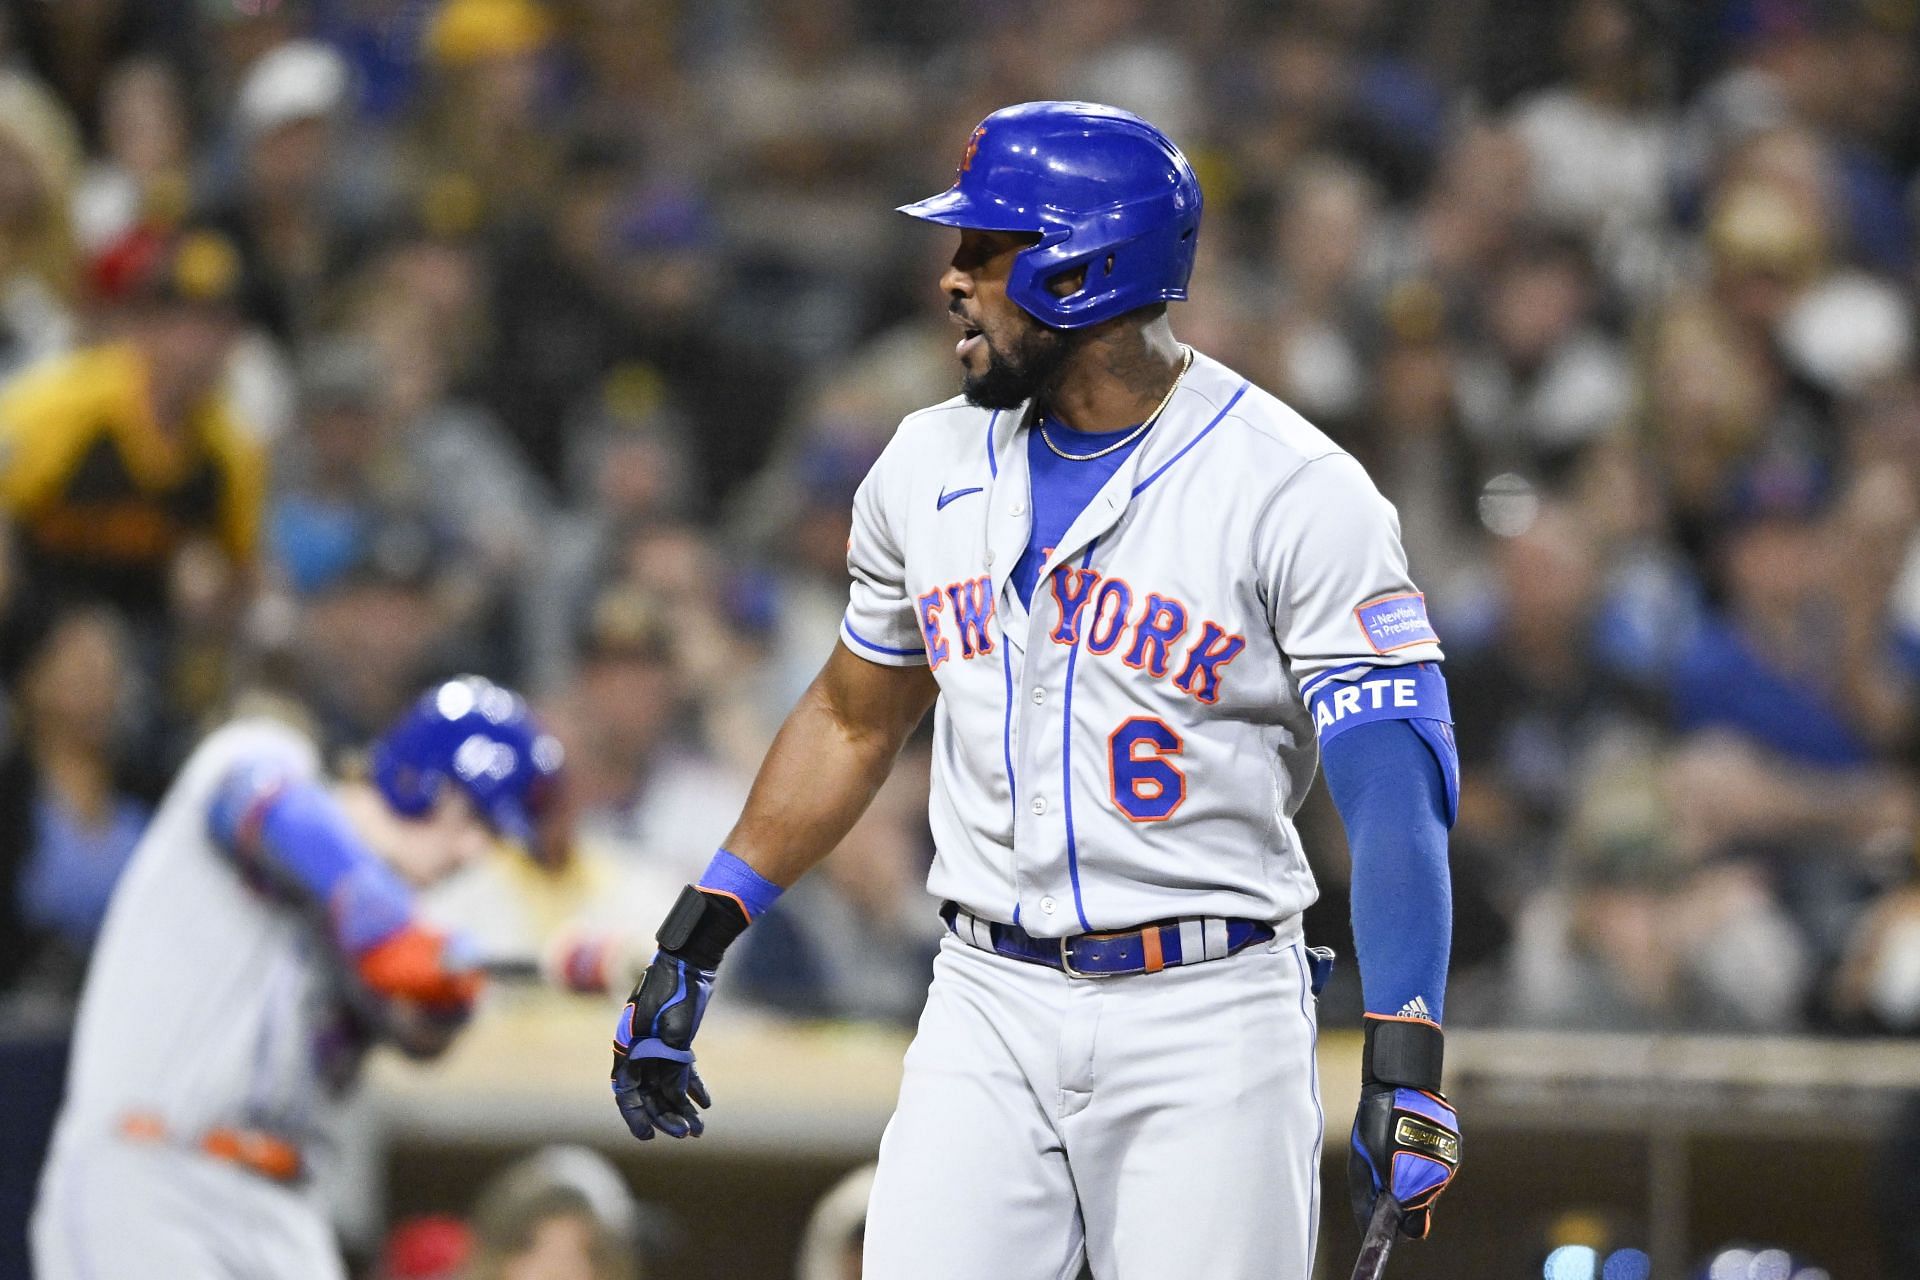 Starling Marte plays for the New York Mets and formerly the Marlins